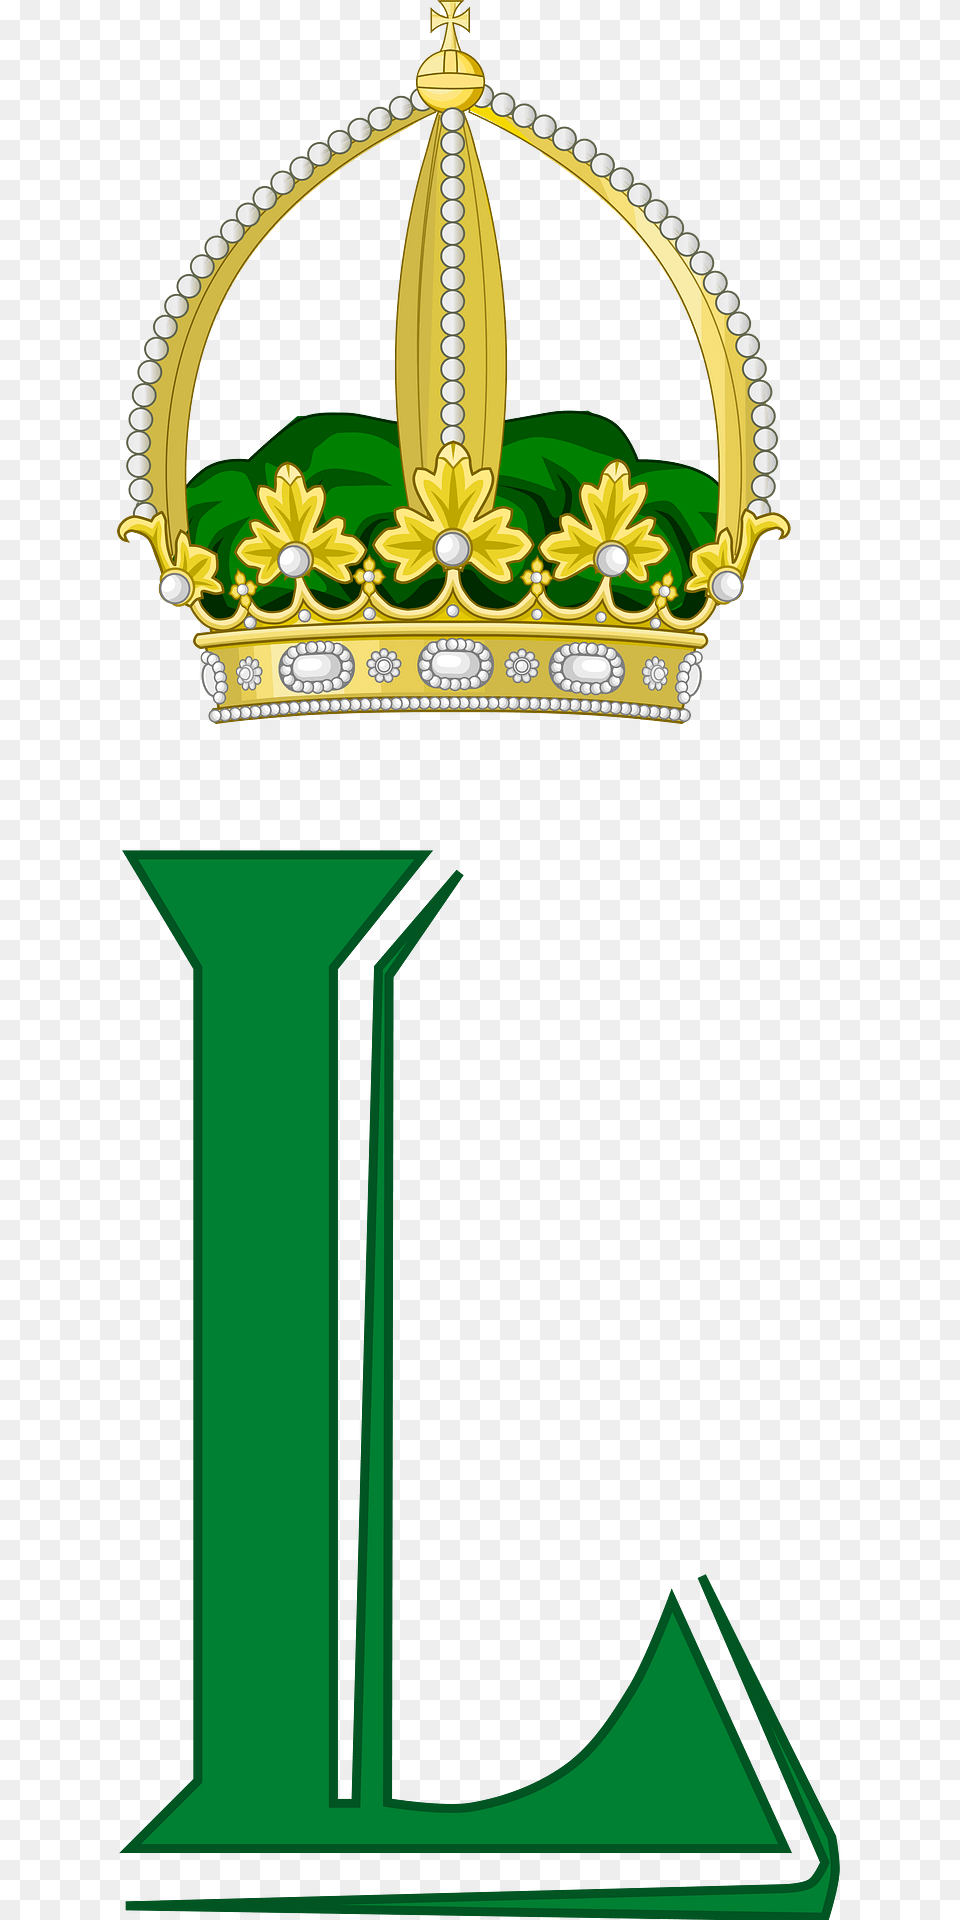 Imperial Monogram Of Prince Prince Lus Of Orlans Braganza Of Brazil Clipart, Accessories, Jewelry, Crown, Cross Png Image